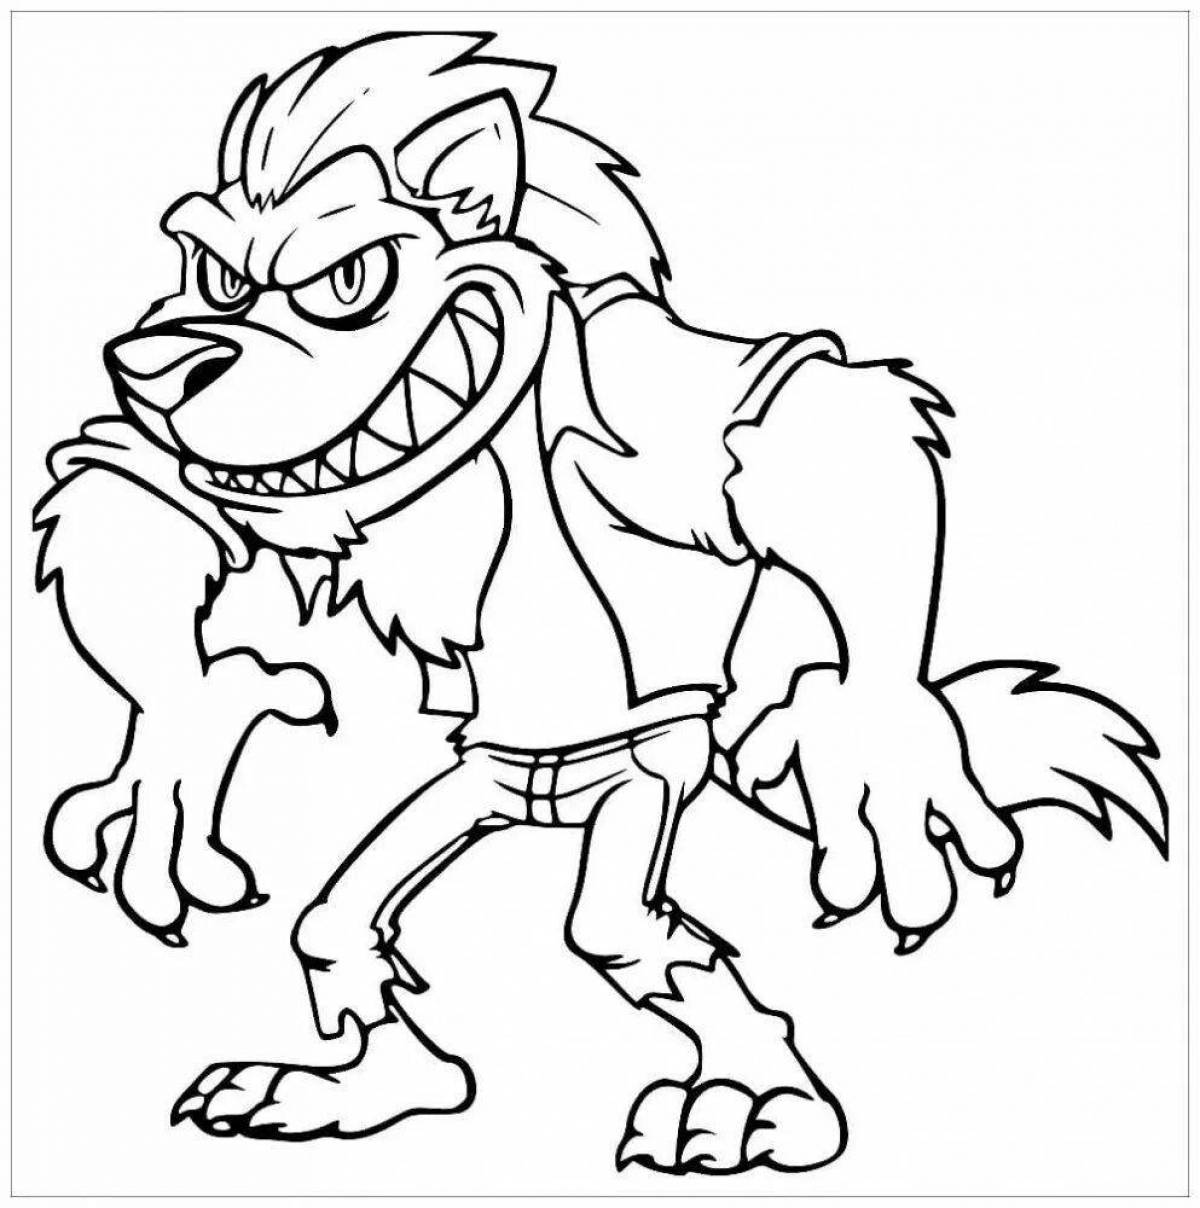 Disturbing werewolf coloring pages for kids